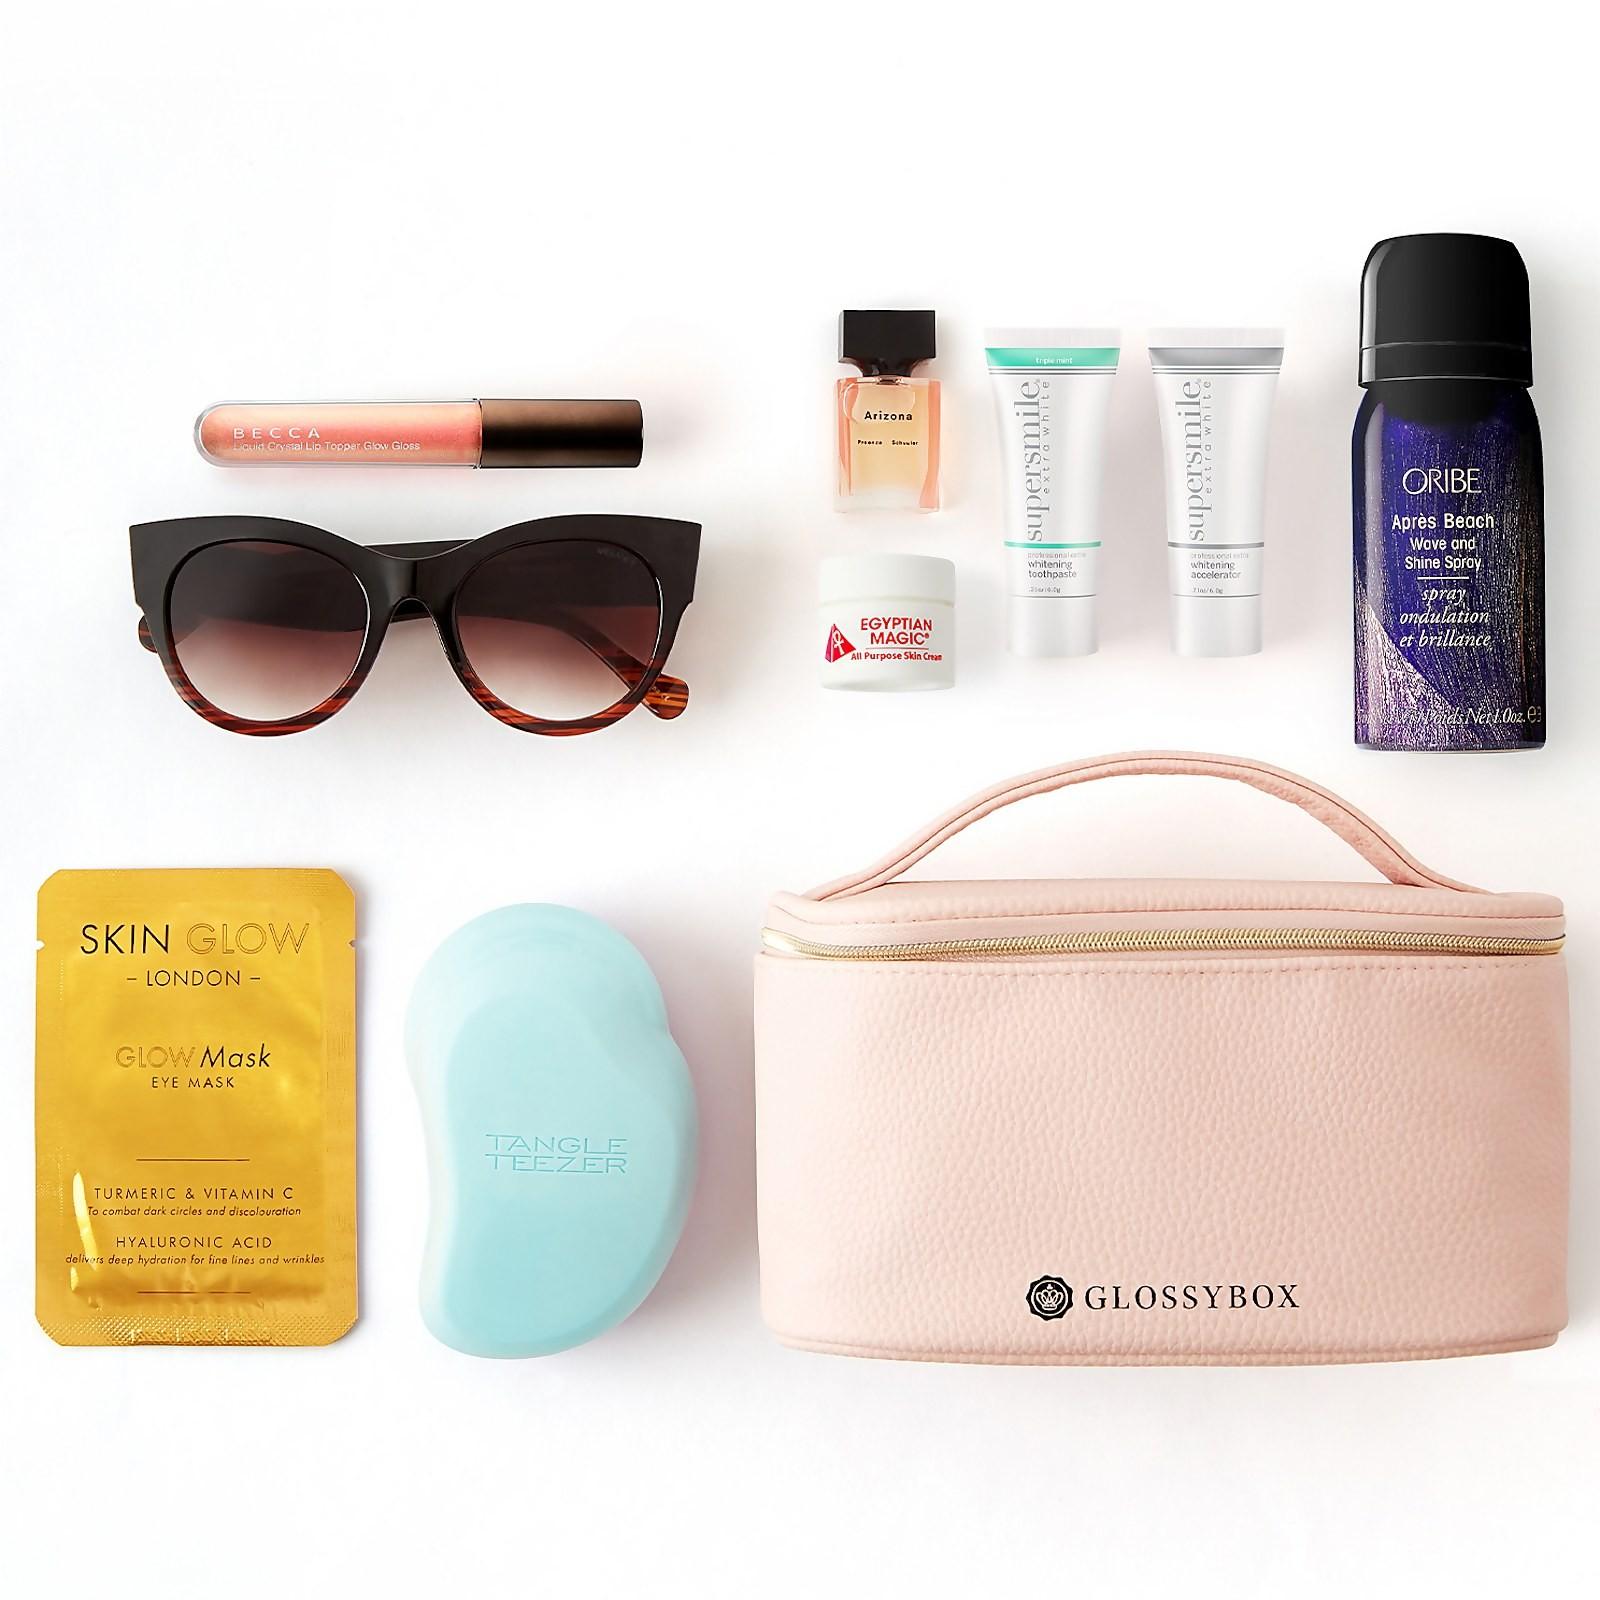 GLOSSYBOX Limited Edition Summer Essentials Bag – On Sale Now!